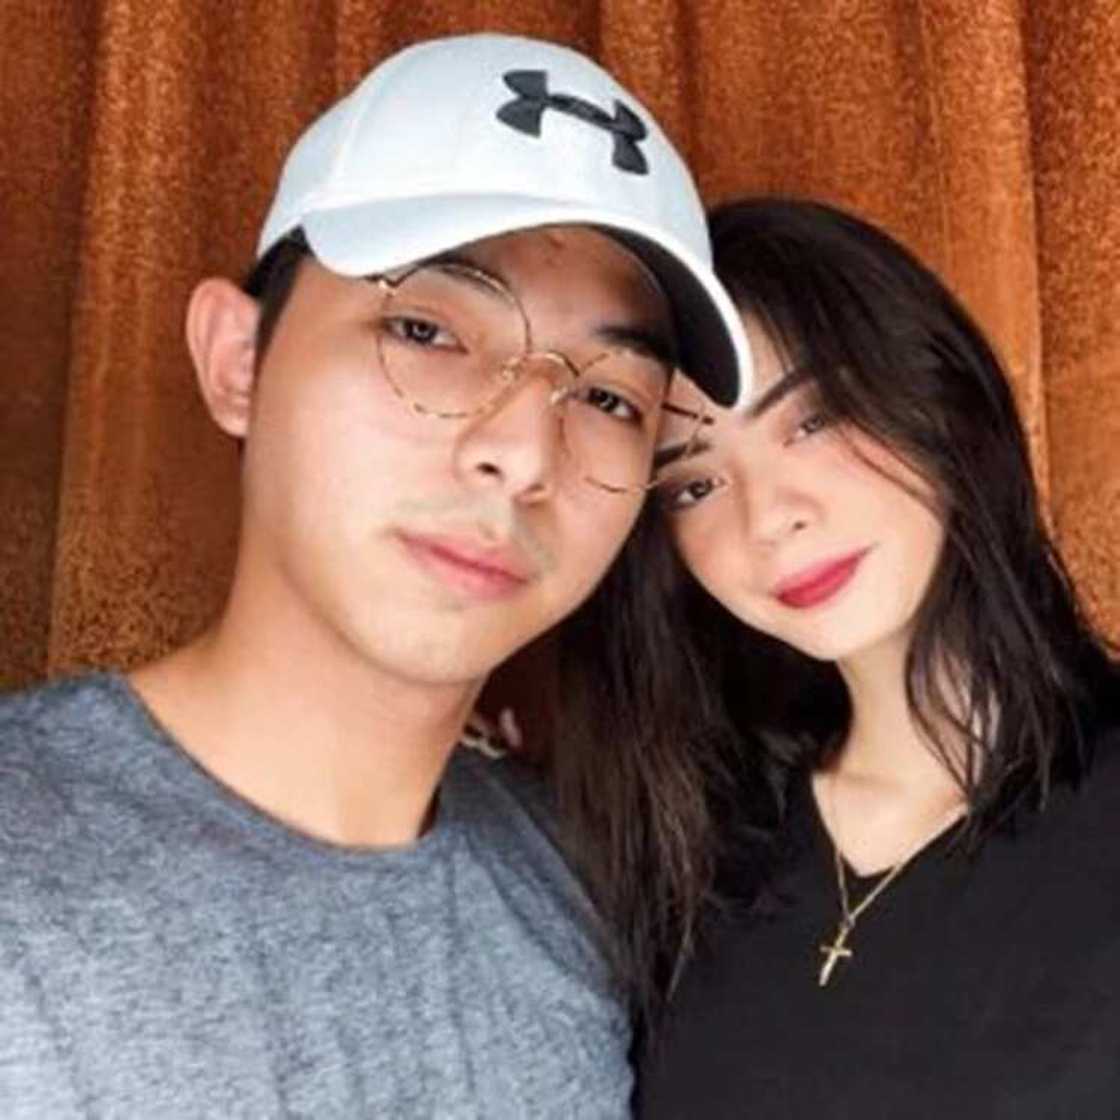 Girl of 'Jamill' love team earns netizens ire after allegedly disrespecting boyfriend's mom